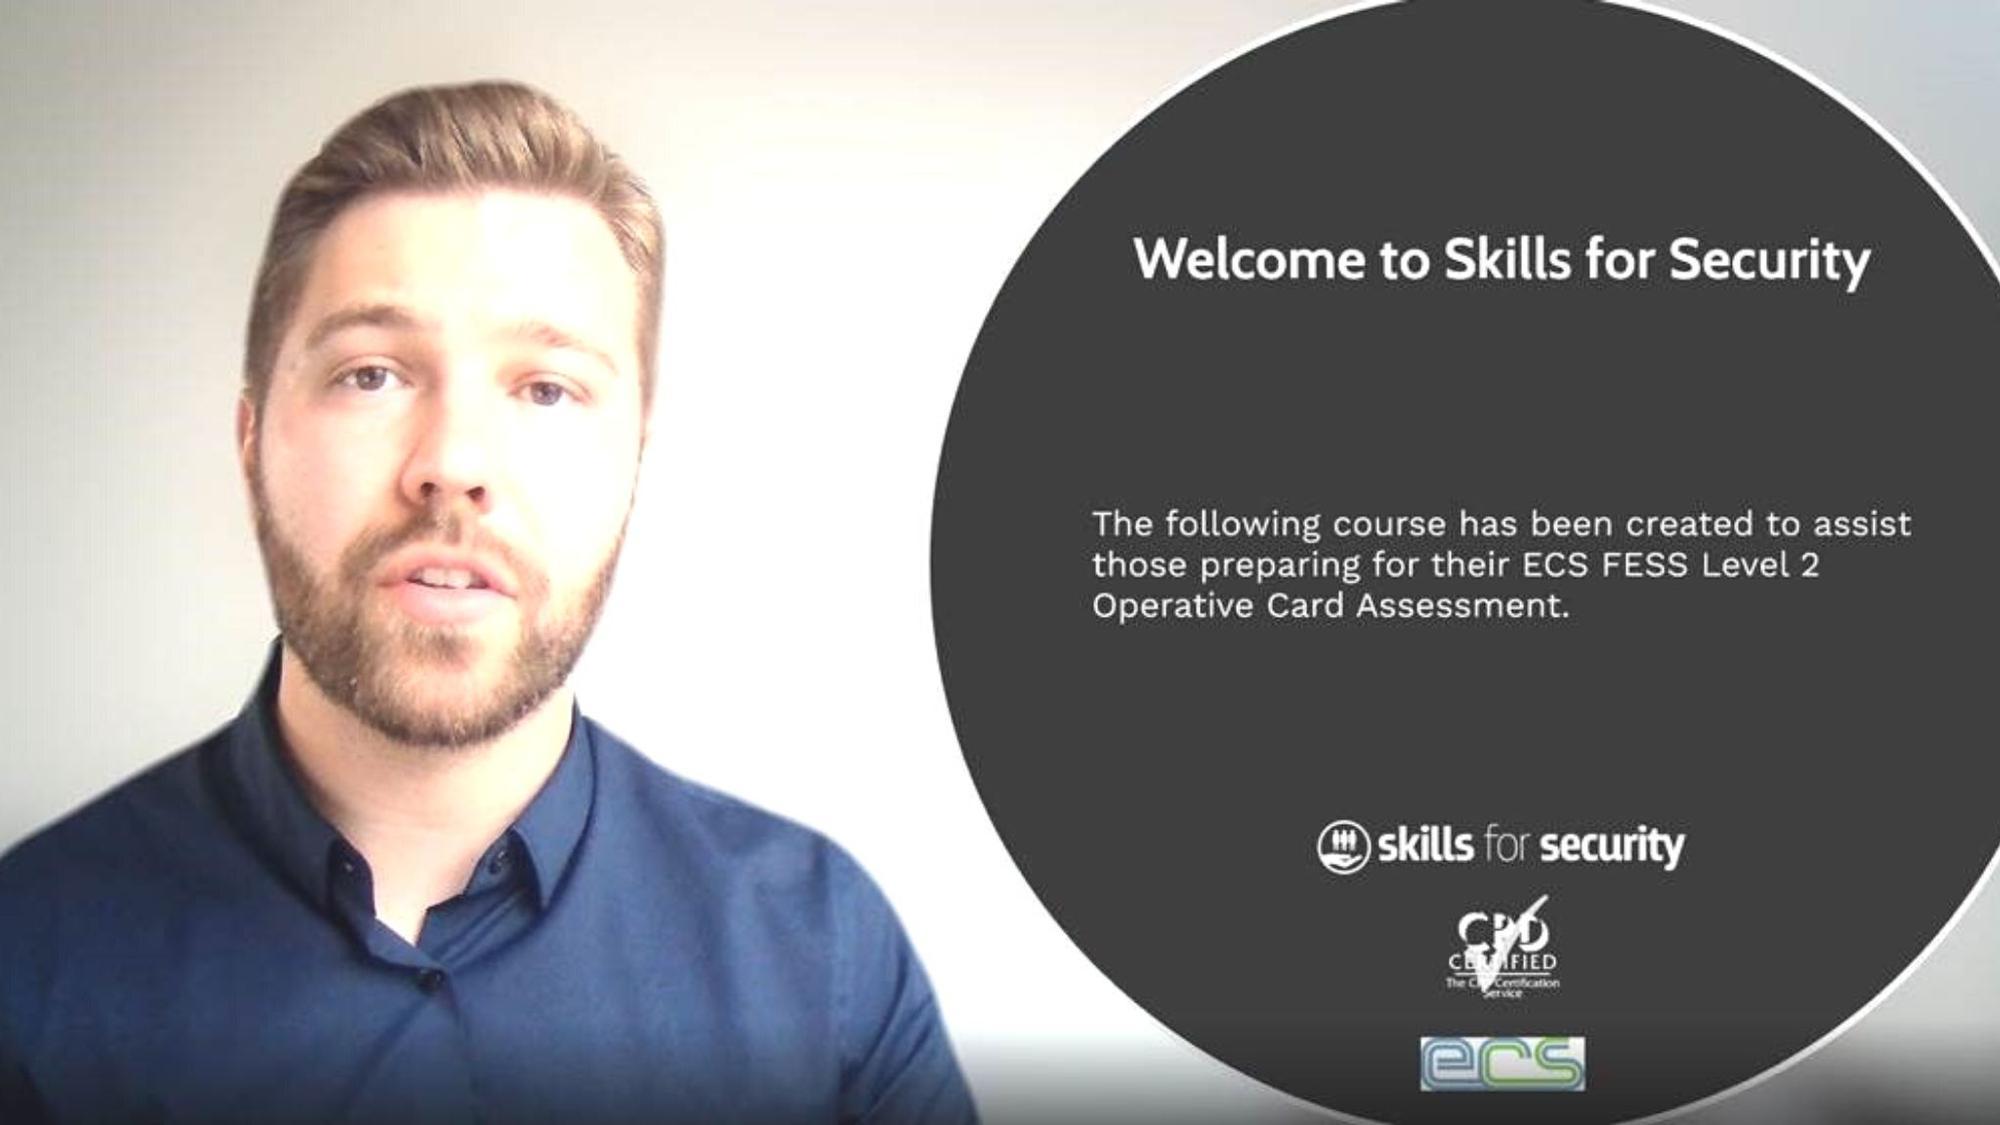 Skills for Security develop online course offering